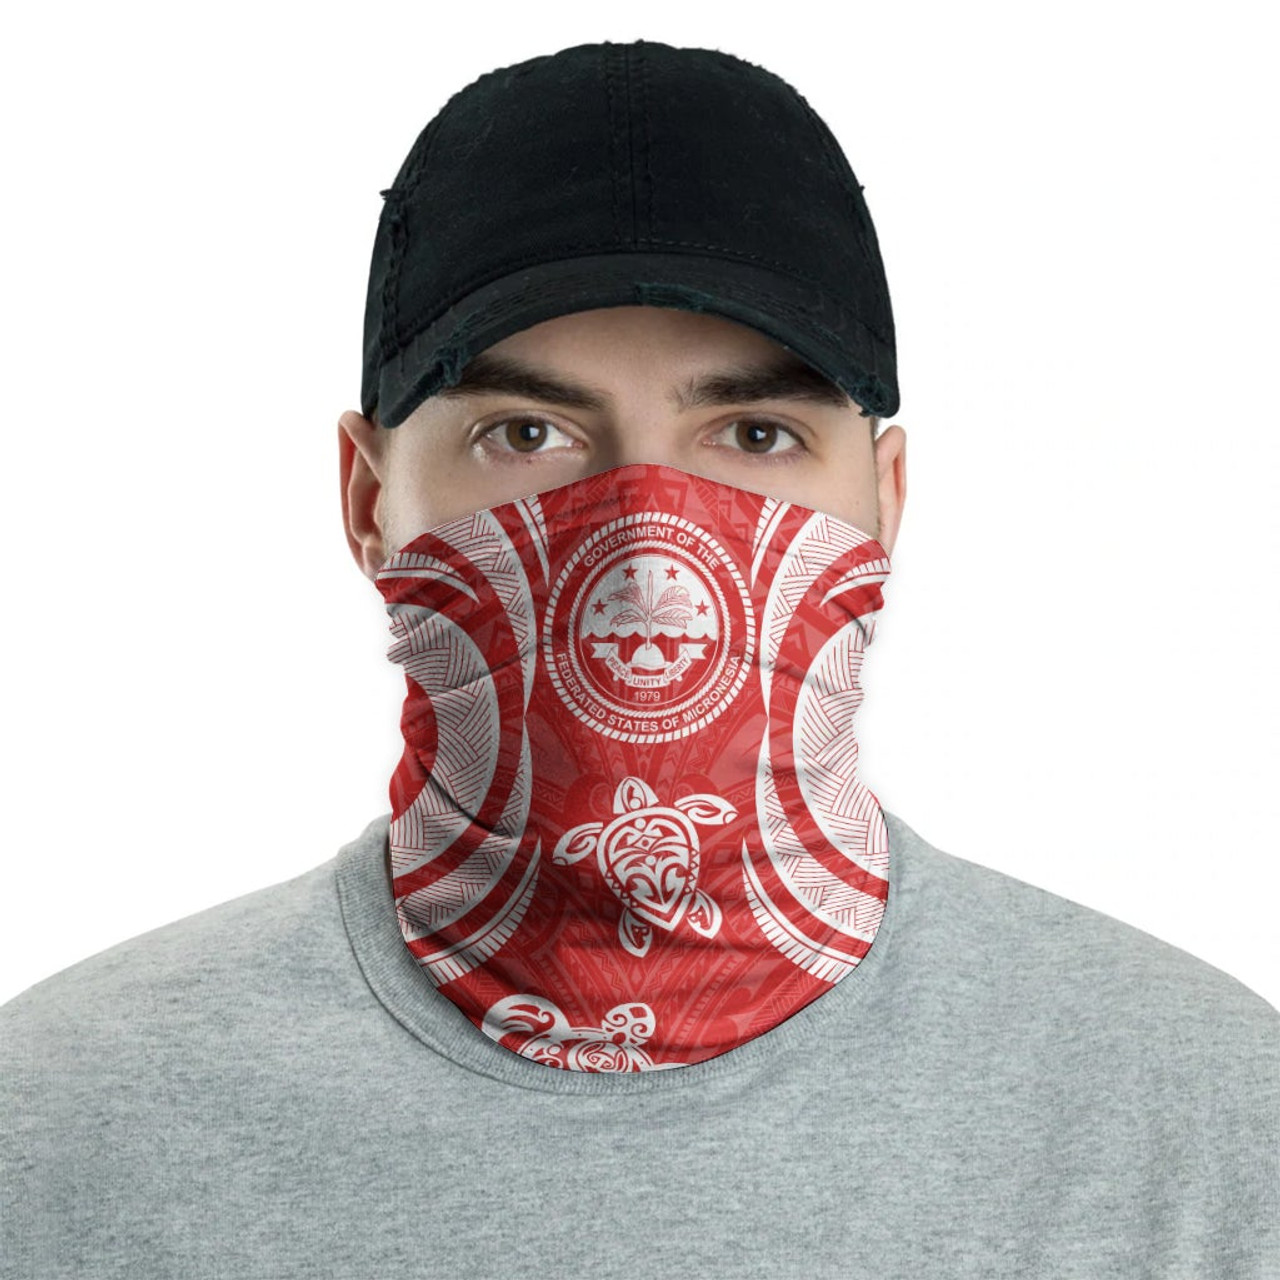 Federated States of Micronesia Neck Gaiter - Turtle Tentacle White Red 2